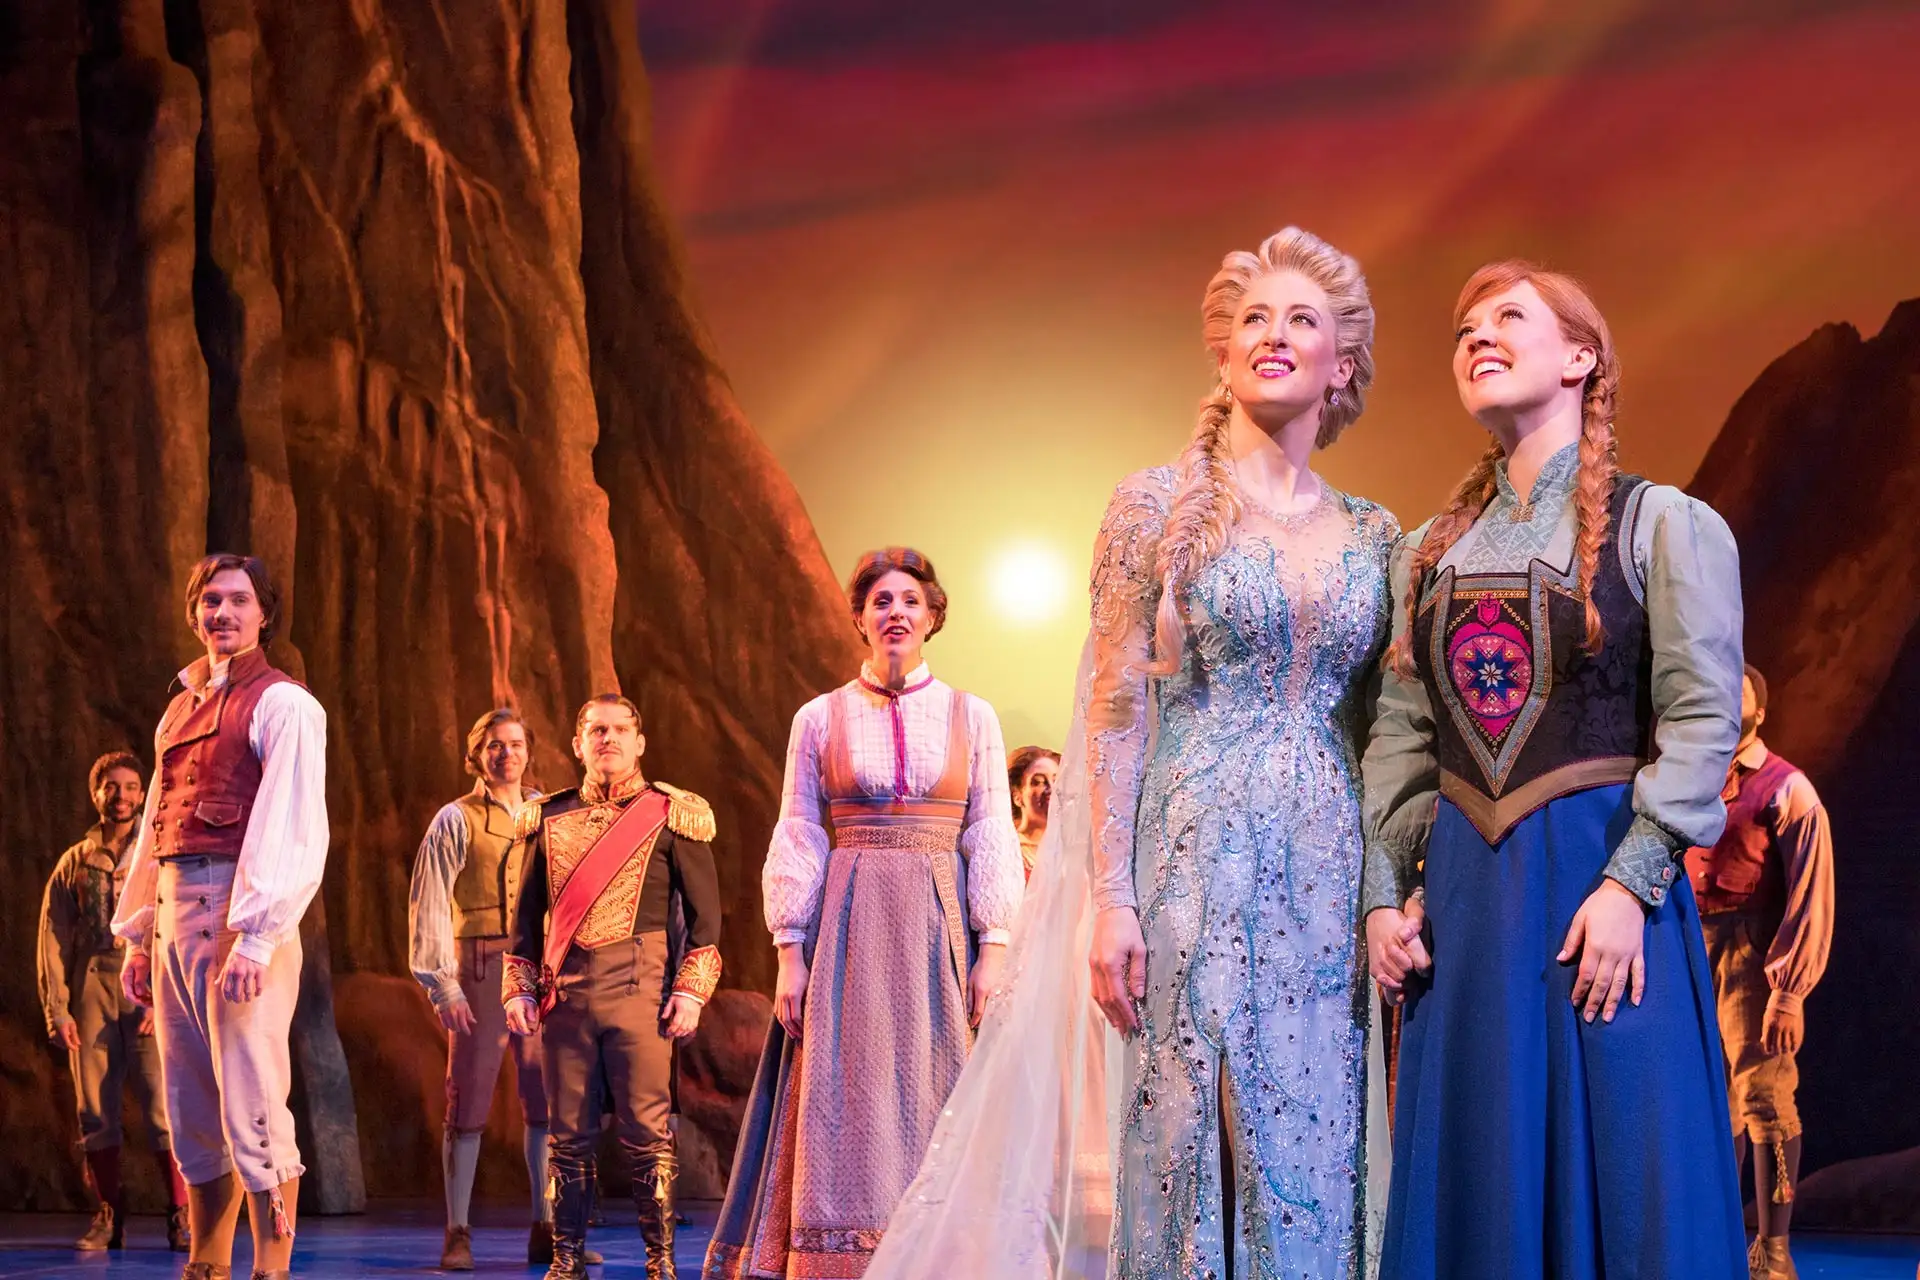 Frozen The Musical on Broadway in NYC